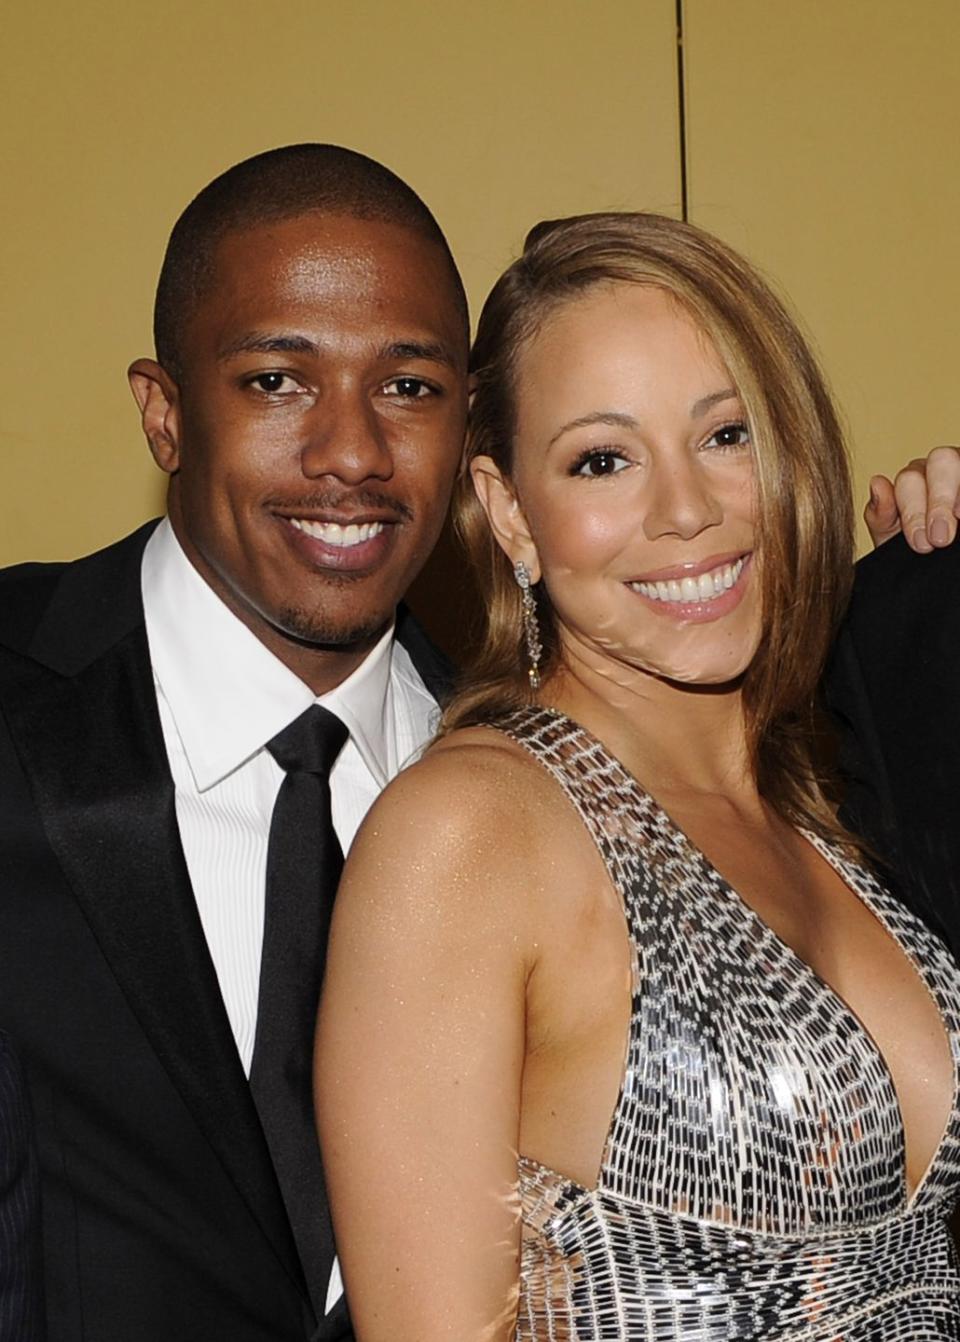 <p>Although Carey had met actor, rapper, and comedian Nick Cannon a few years earlier, the two didn’t start seriously dating until 2008. The couple was only together for around two months before tying the knot, and gave birth to twins a few years later. </p>